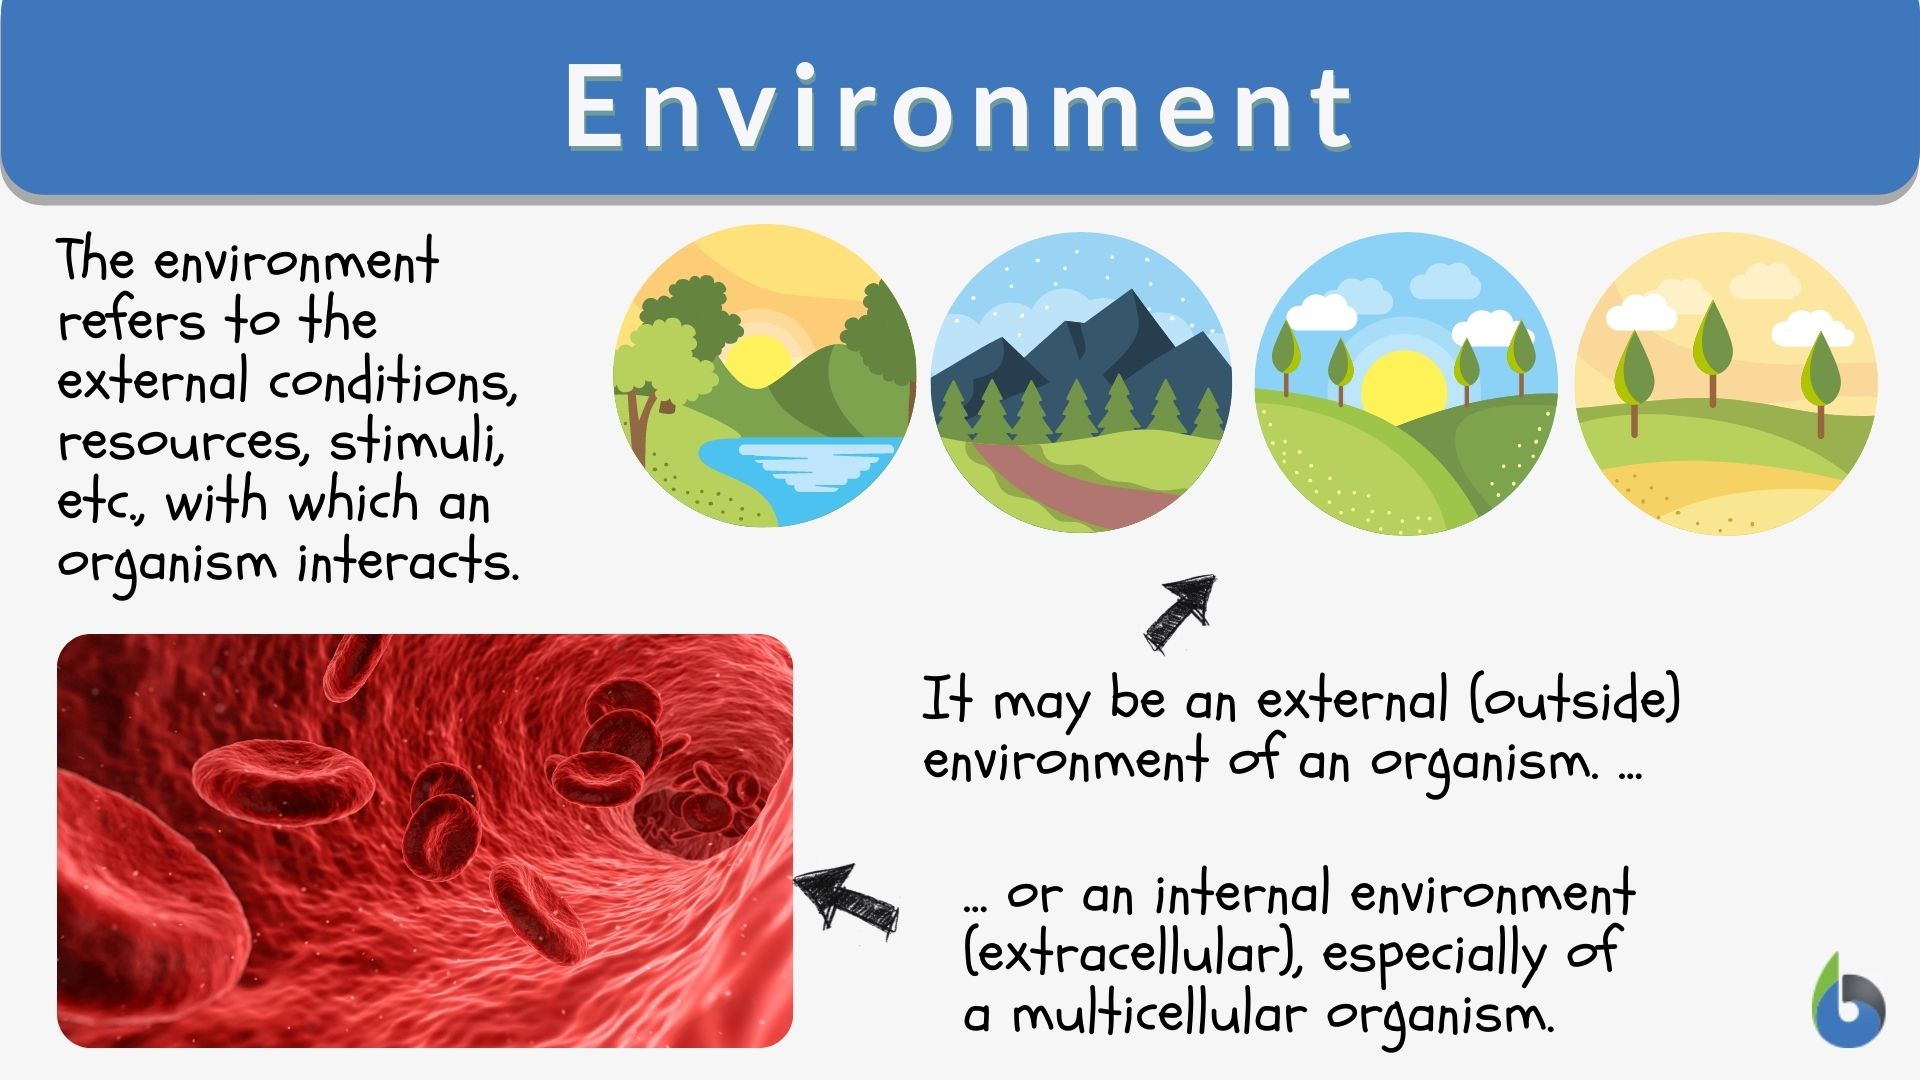 https://www.biologyonline.com/wp-content/uploads/2020/09/environment-definition-and-examples.jpg